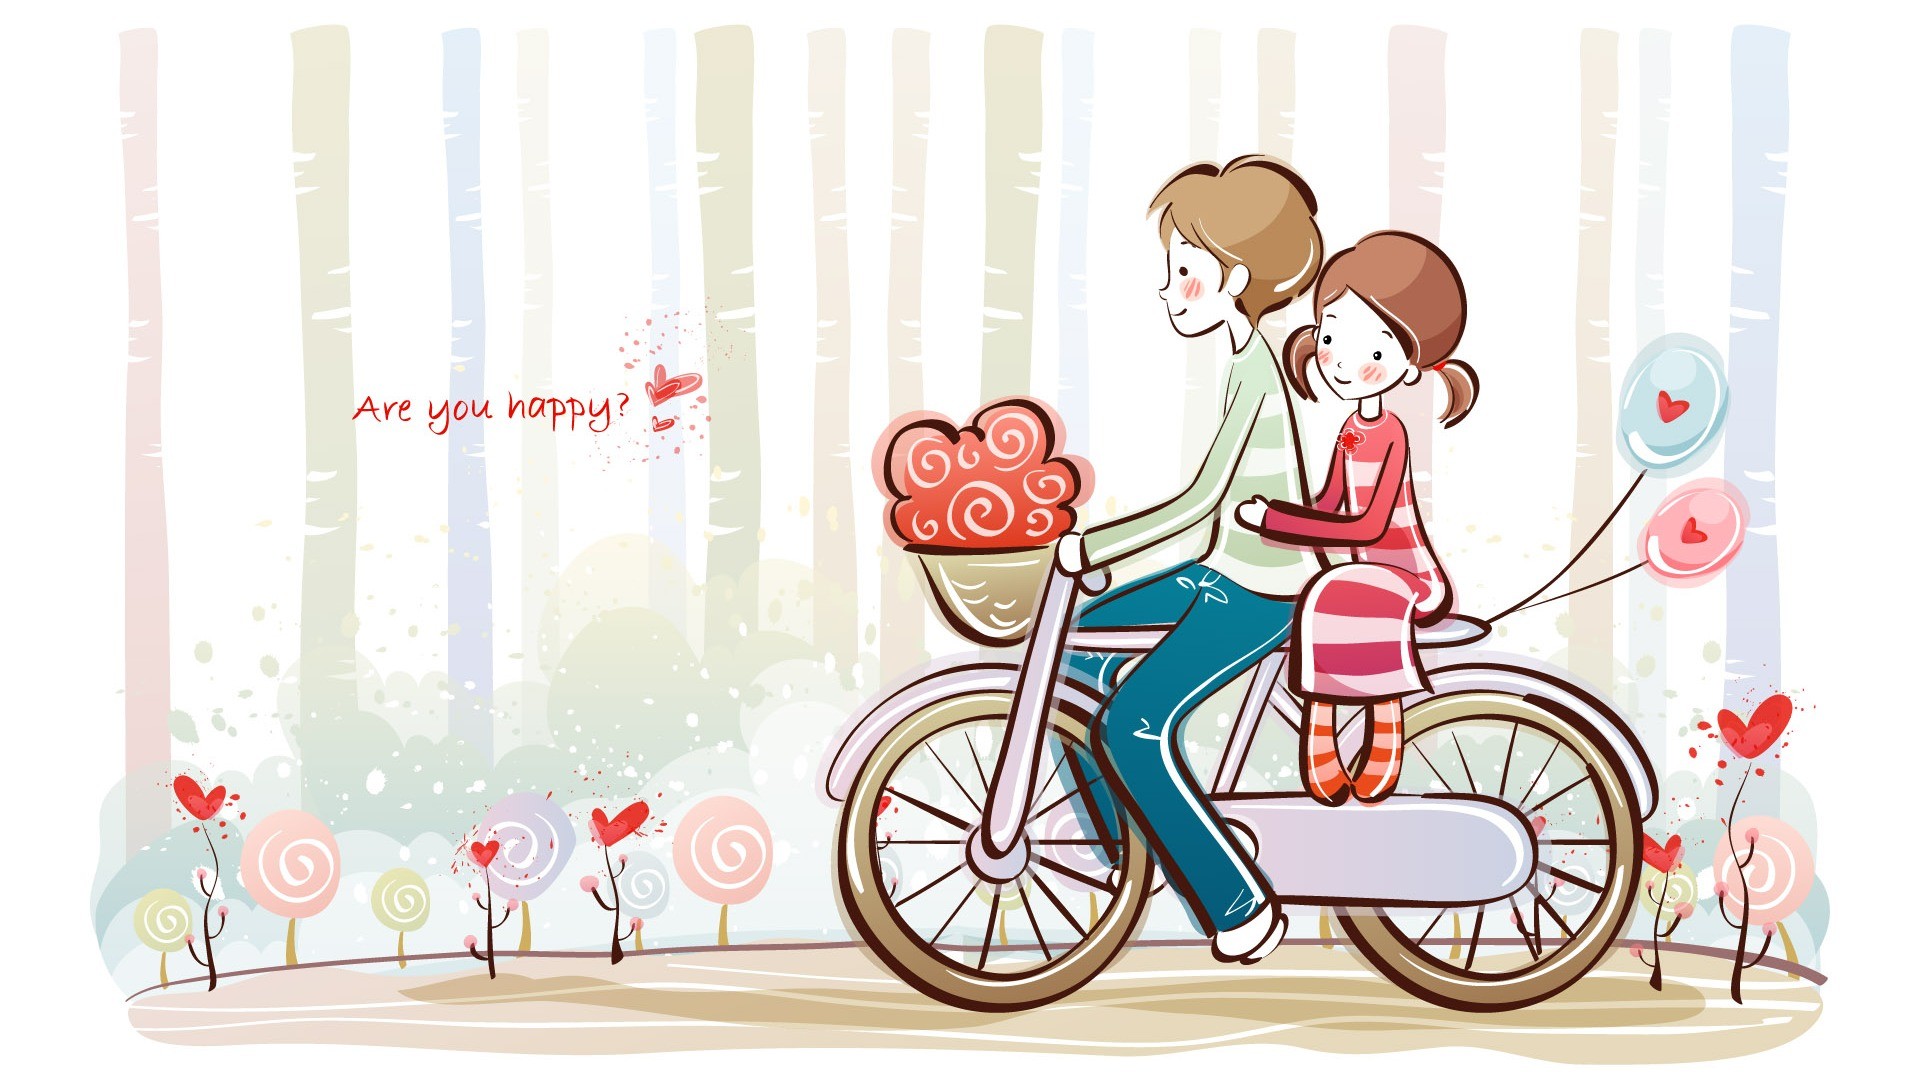 Cute Couple Cartoon images | Background HD Wallpaper